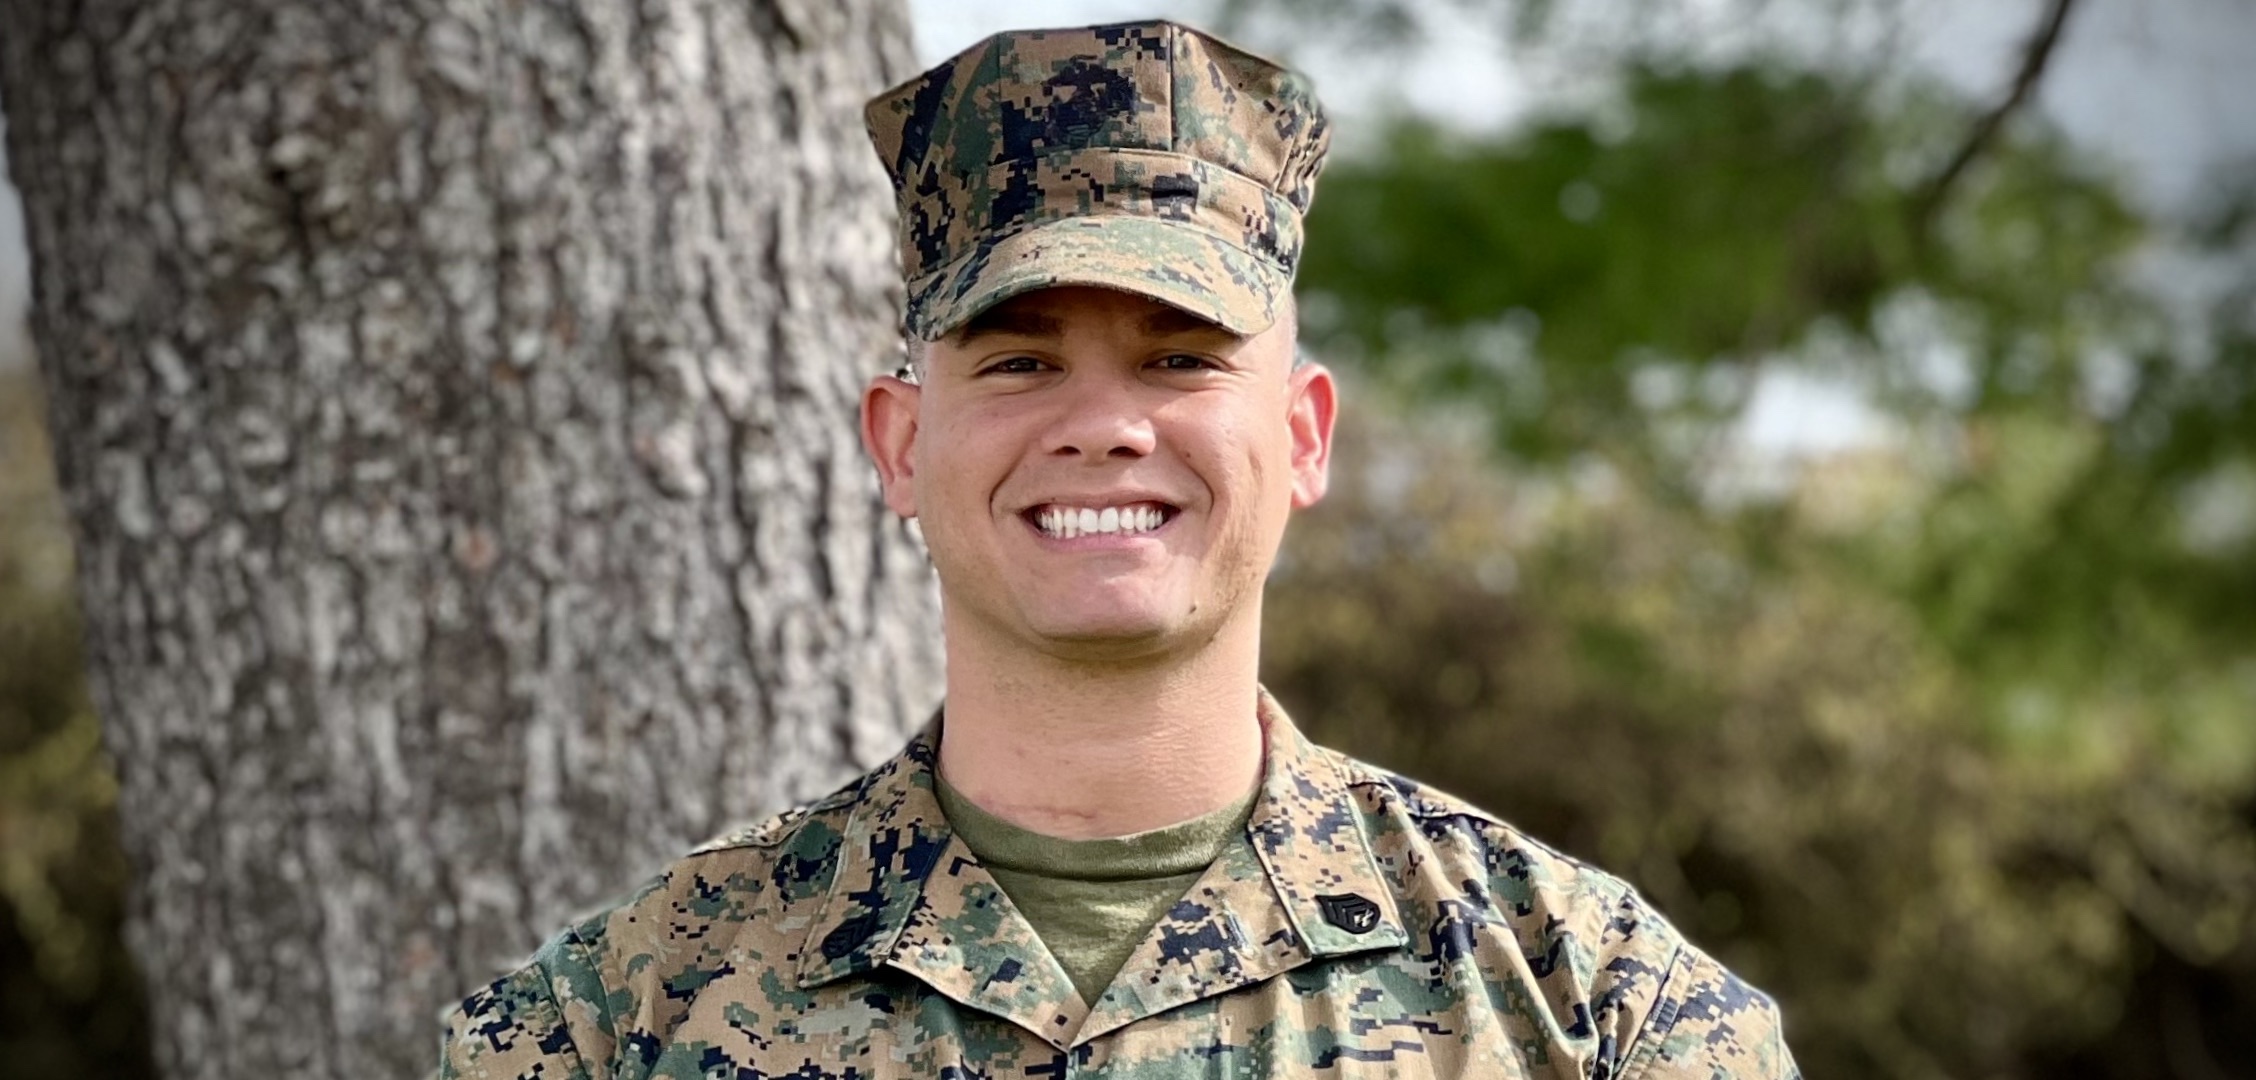 A man wearing a camouflage hat and shirt smiles in front of a tree.